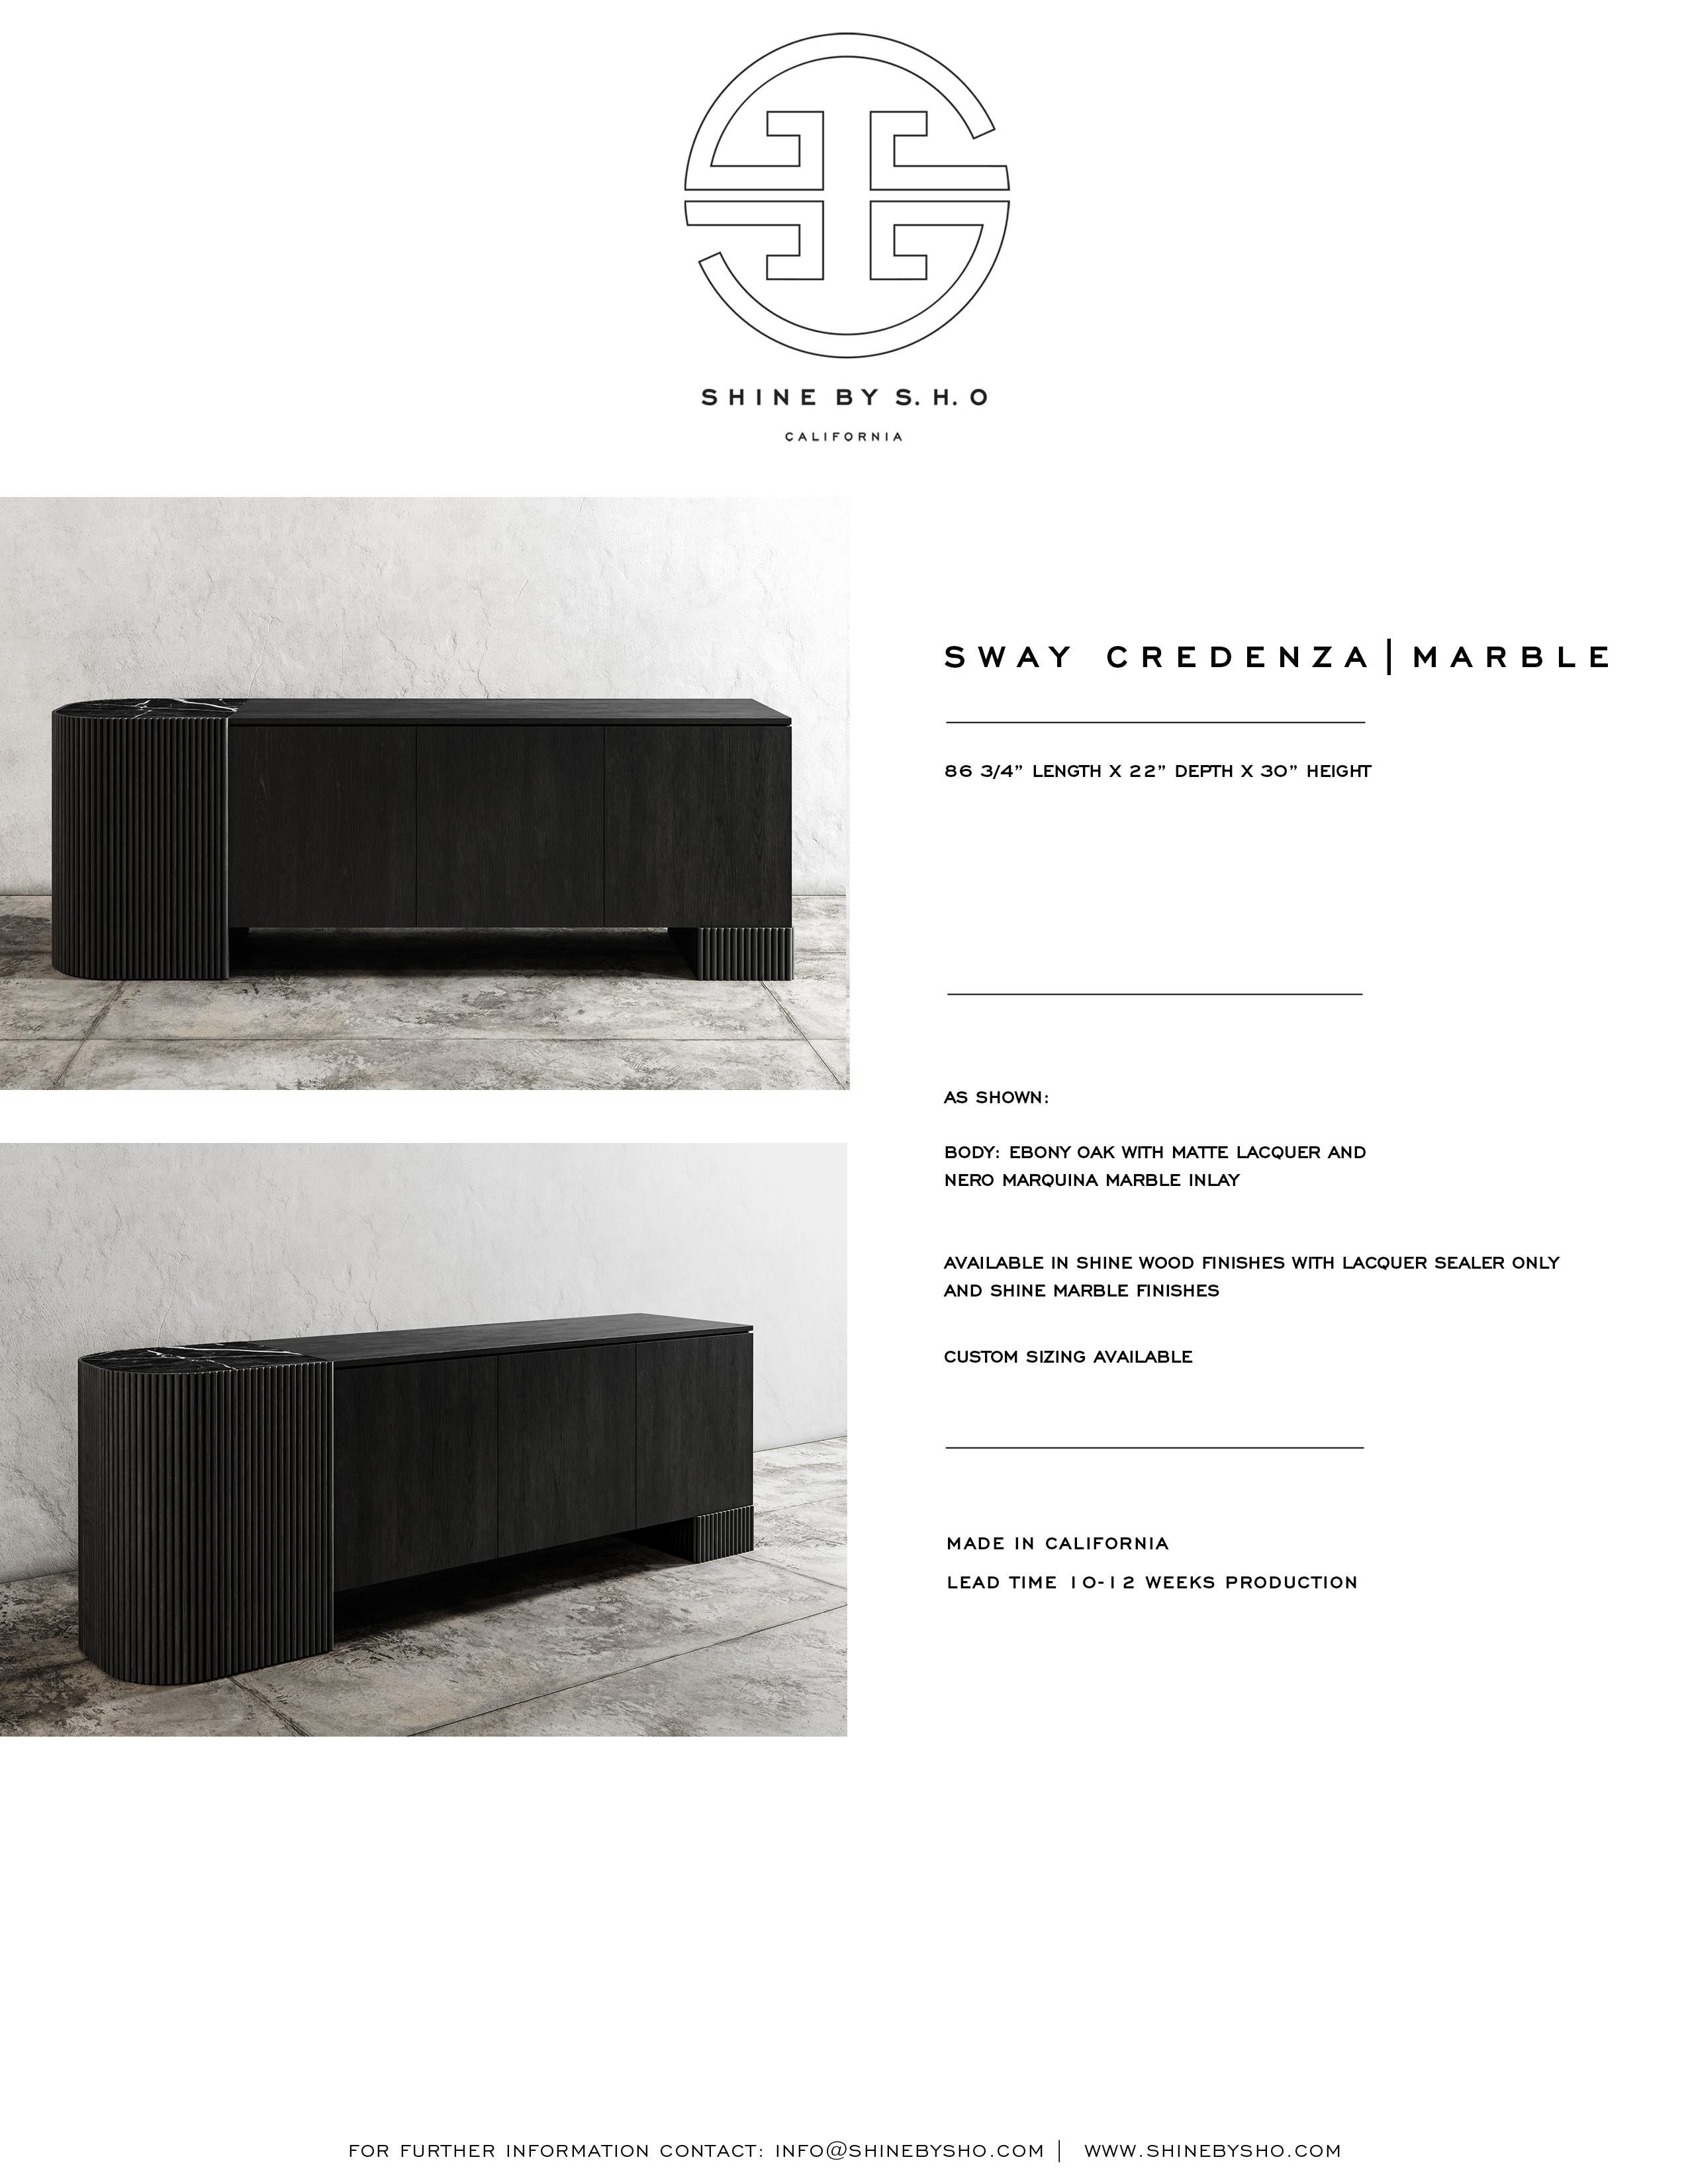 SWAY CREDENZA - Modern Design with Ebony Oak + Nero Marquina Marble In Distressed Condition For Sale In Laguna Niguel, CA